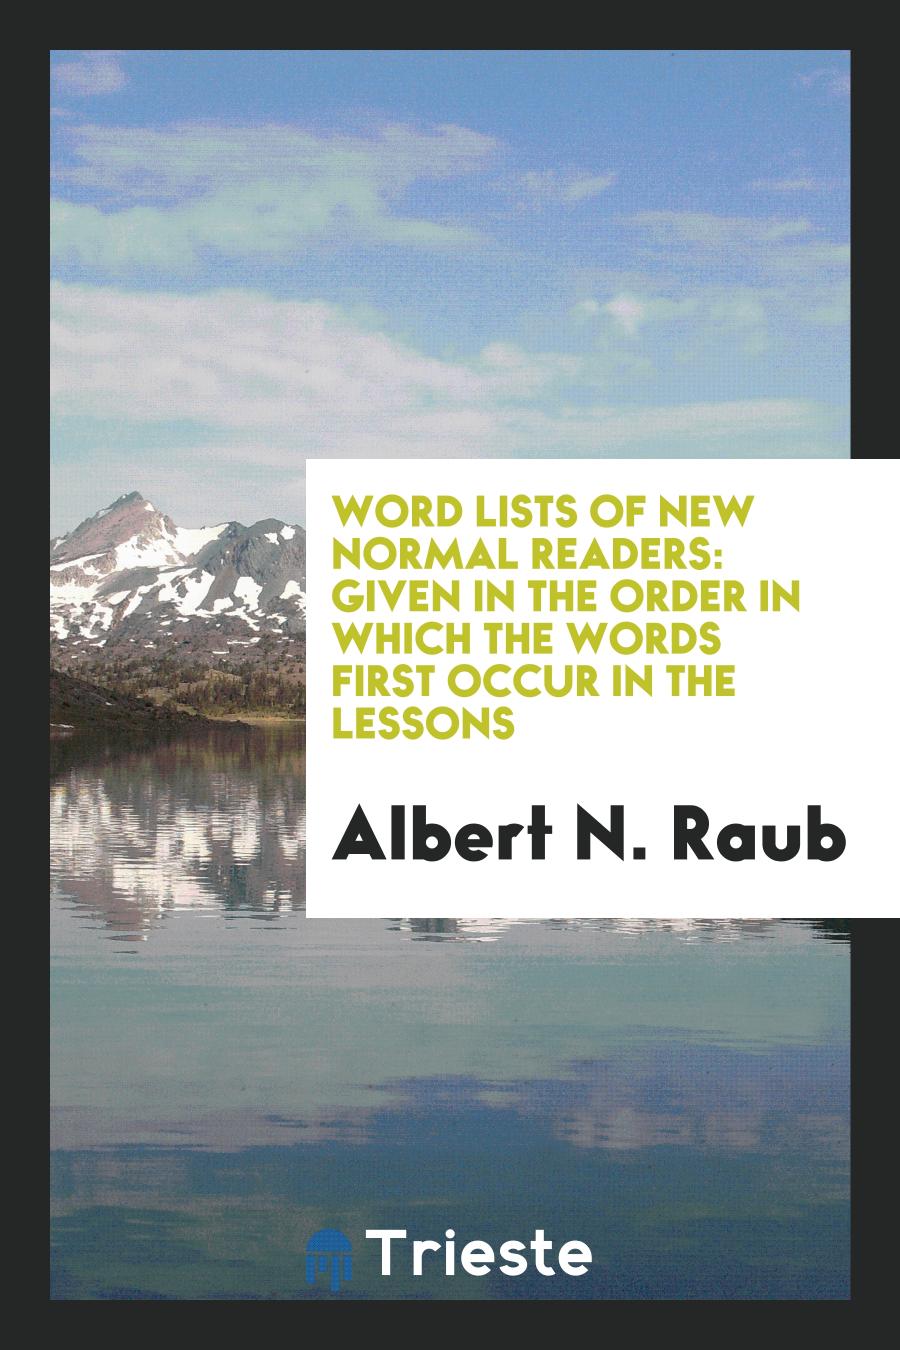 Word Lists of New Normal Readers: Given in the Order in which the Words First Occur in the Lessons